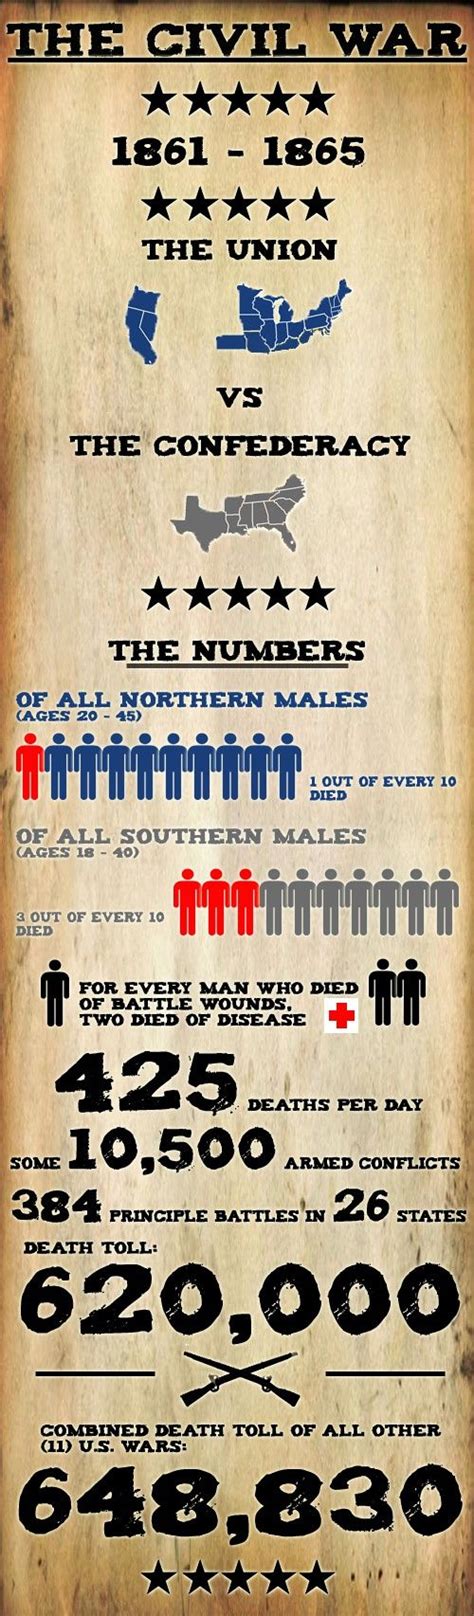 Us Civil War Infographic Poster History Facts Civil War History